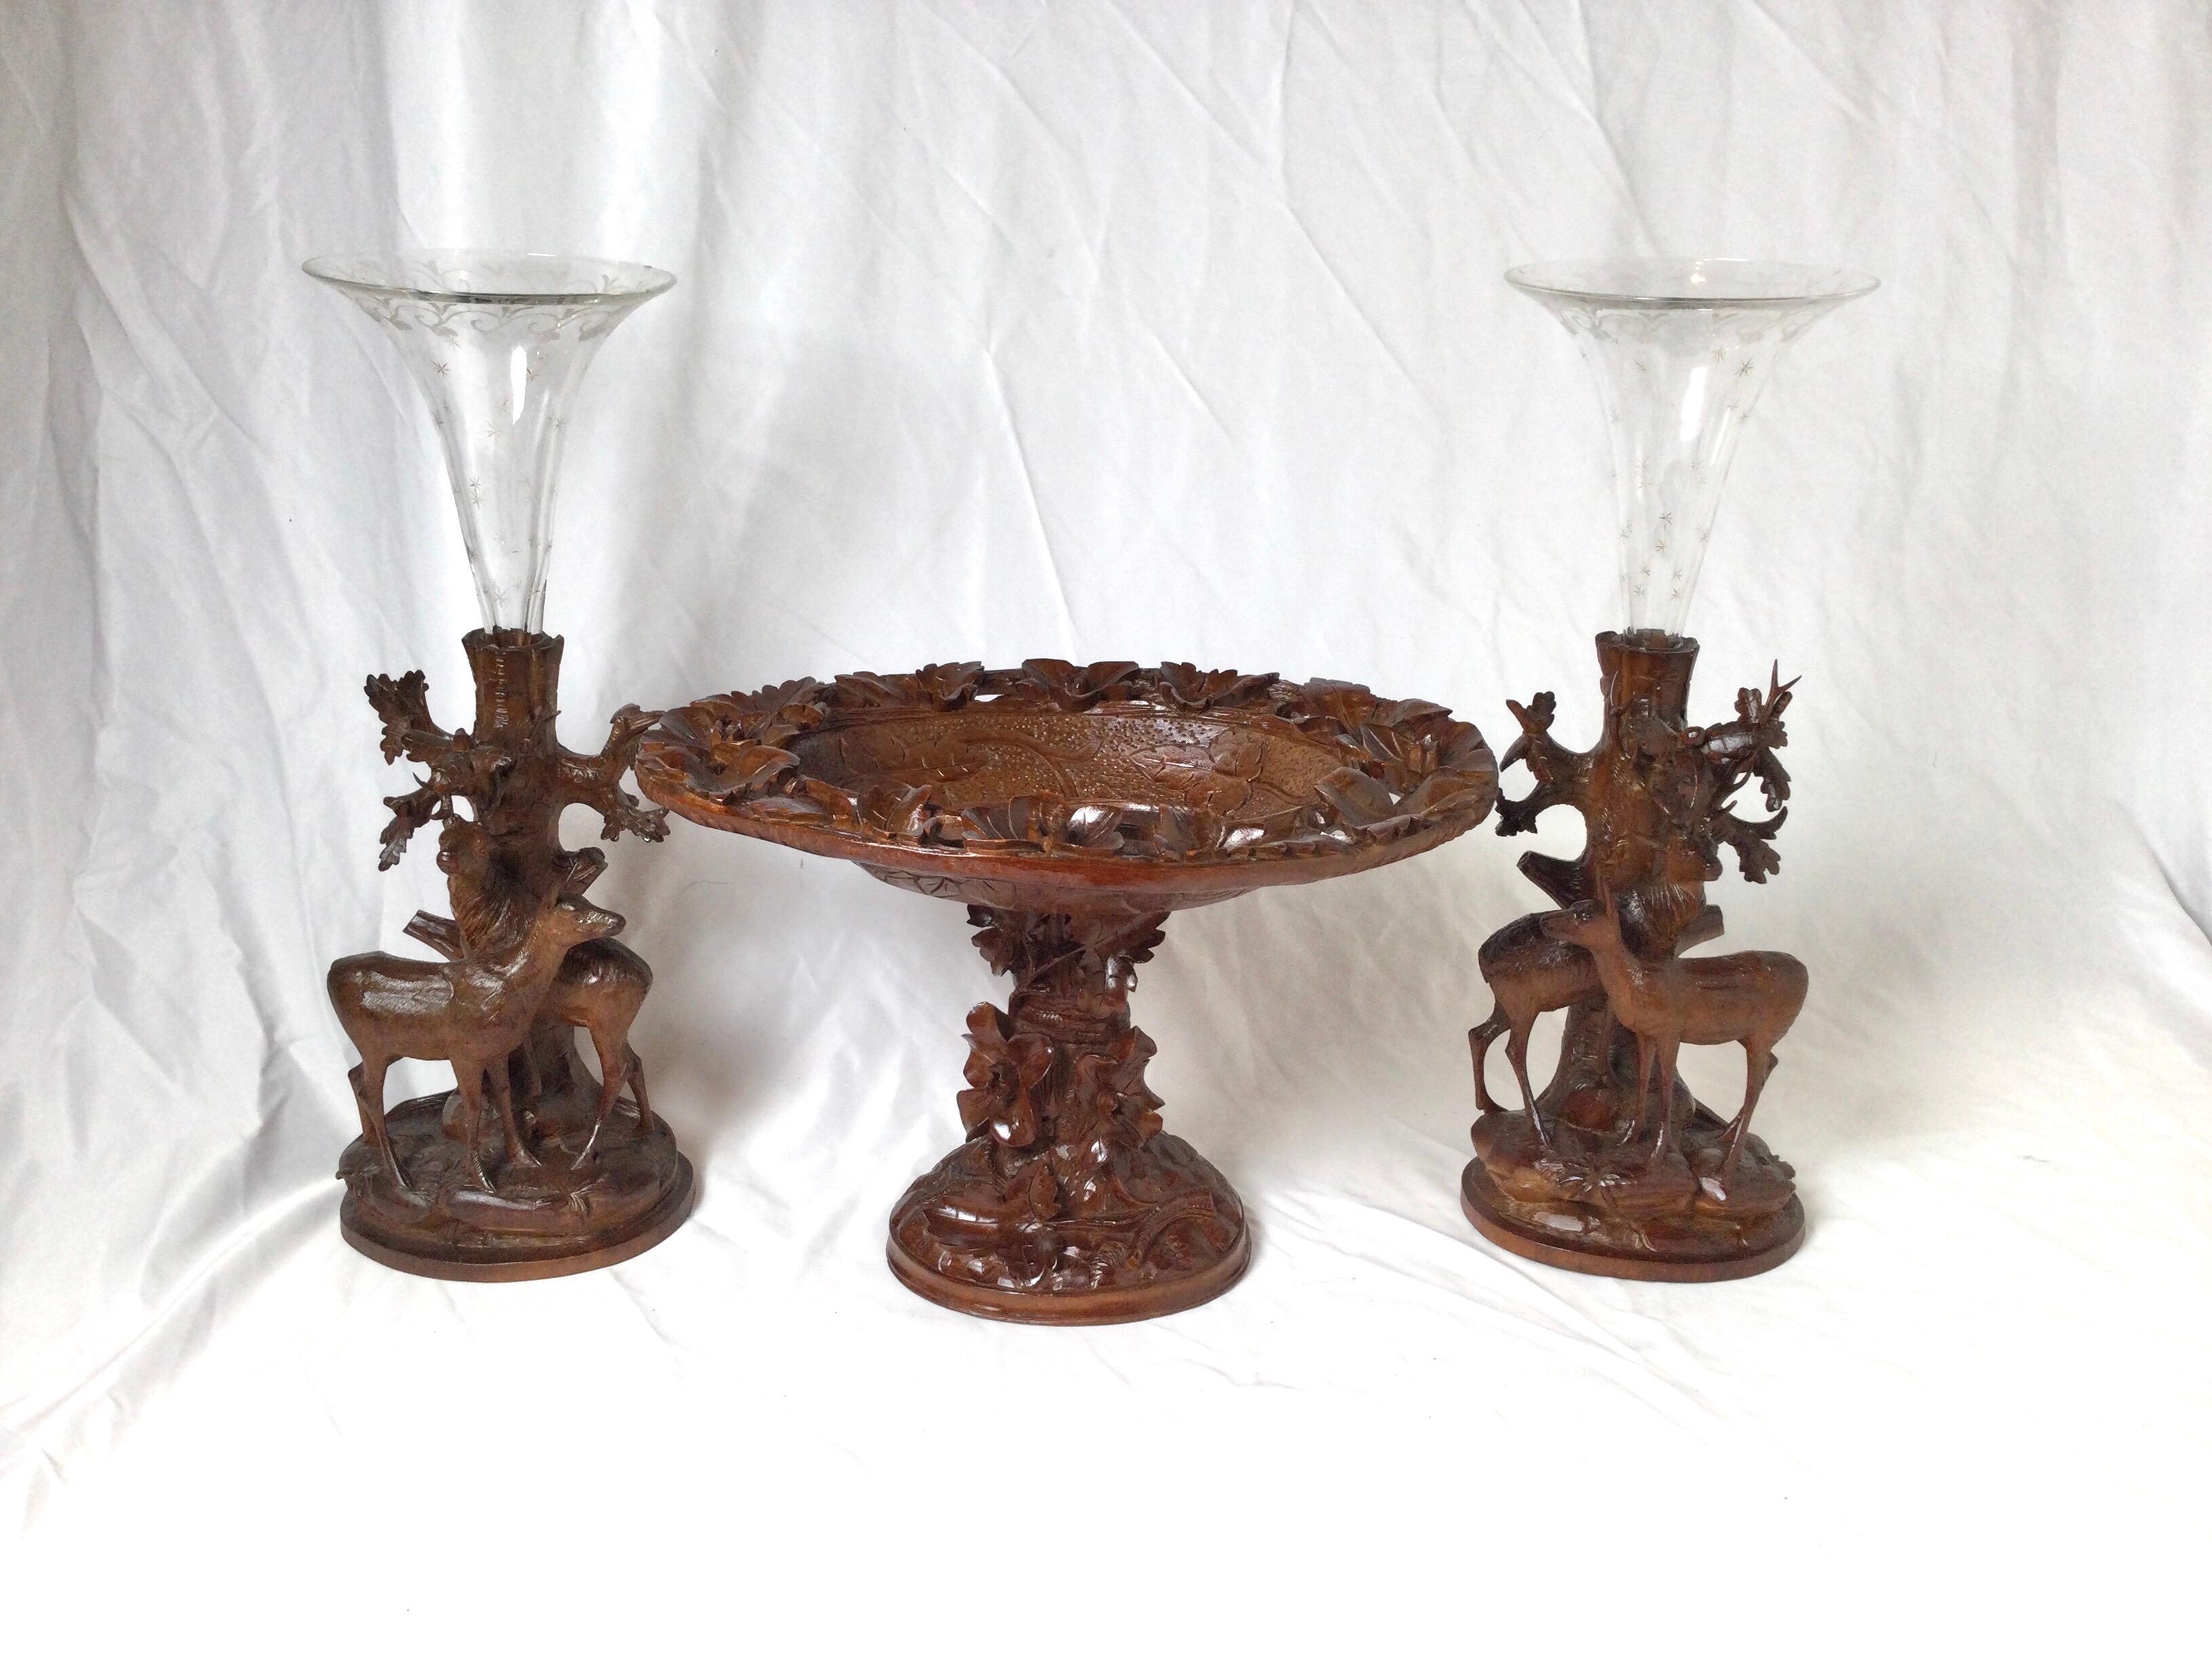 A three piece Black Forest set consisting of and oval pedestal center bow with two flanking wood and etched glass trumpet garniture. The set is a medium hand carved black forest Germany set, with beautiful etched glass trumpet inserts. small chip on